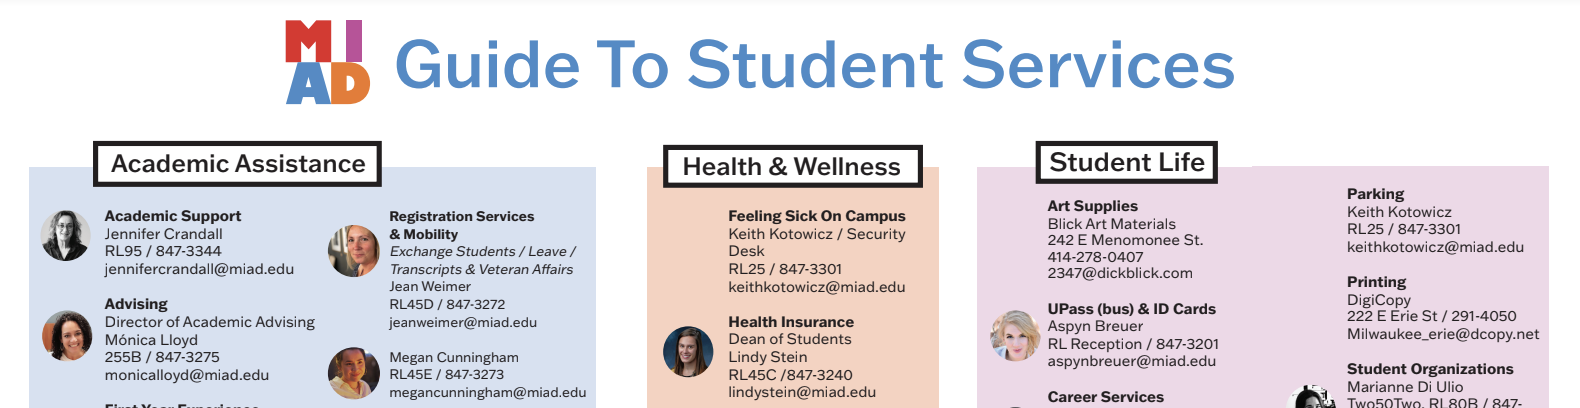 Guide to Student Services at MIAD